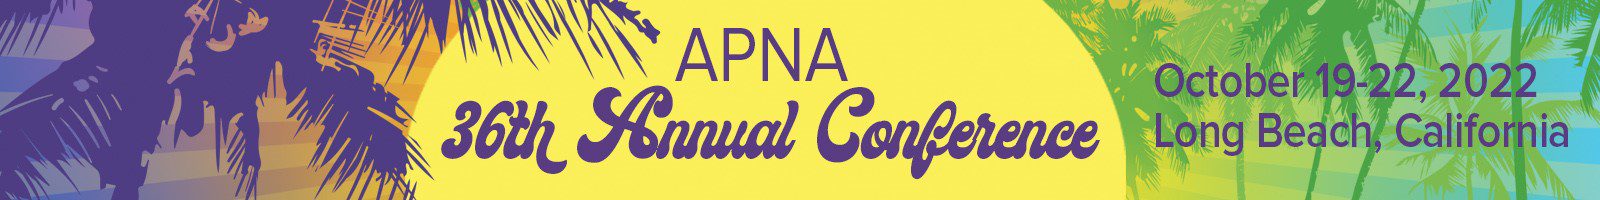 2022 APNA Annual Conference Banner